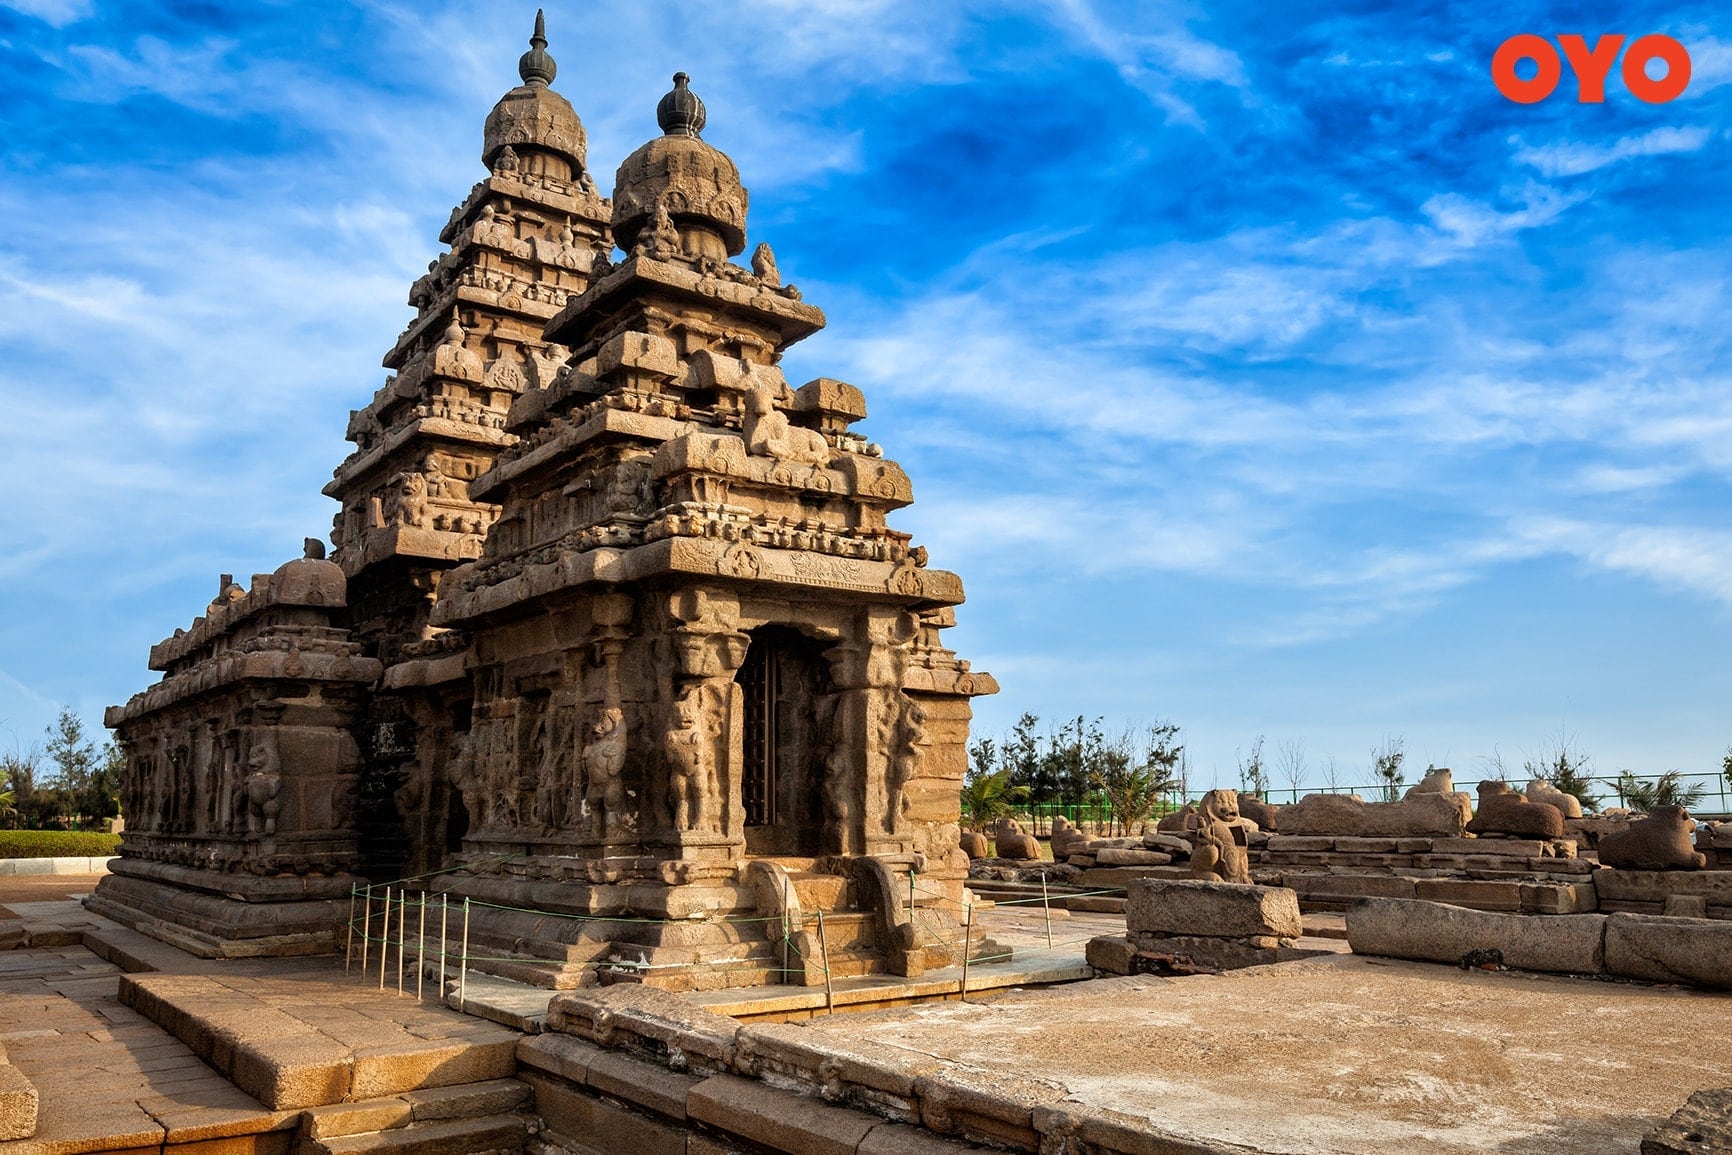 Mahabalipuram - one of the best weekend getaways from Chennai within 100 kms